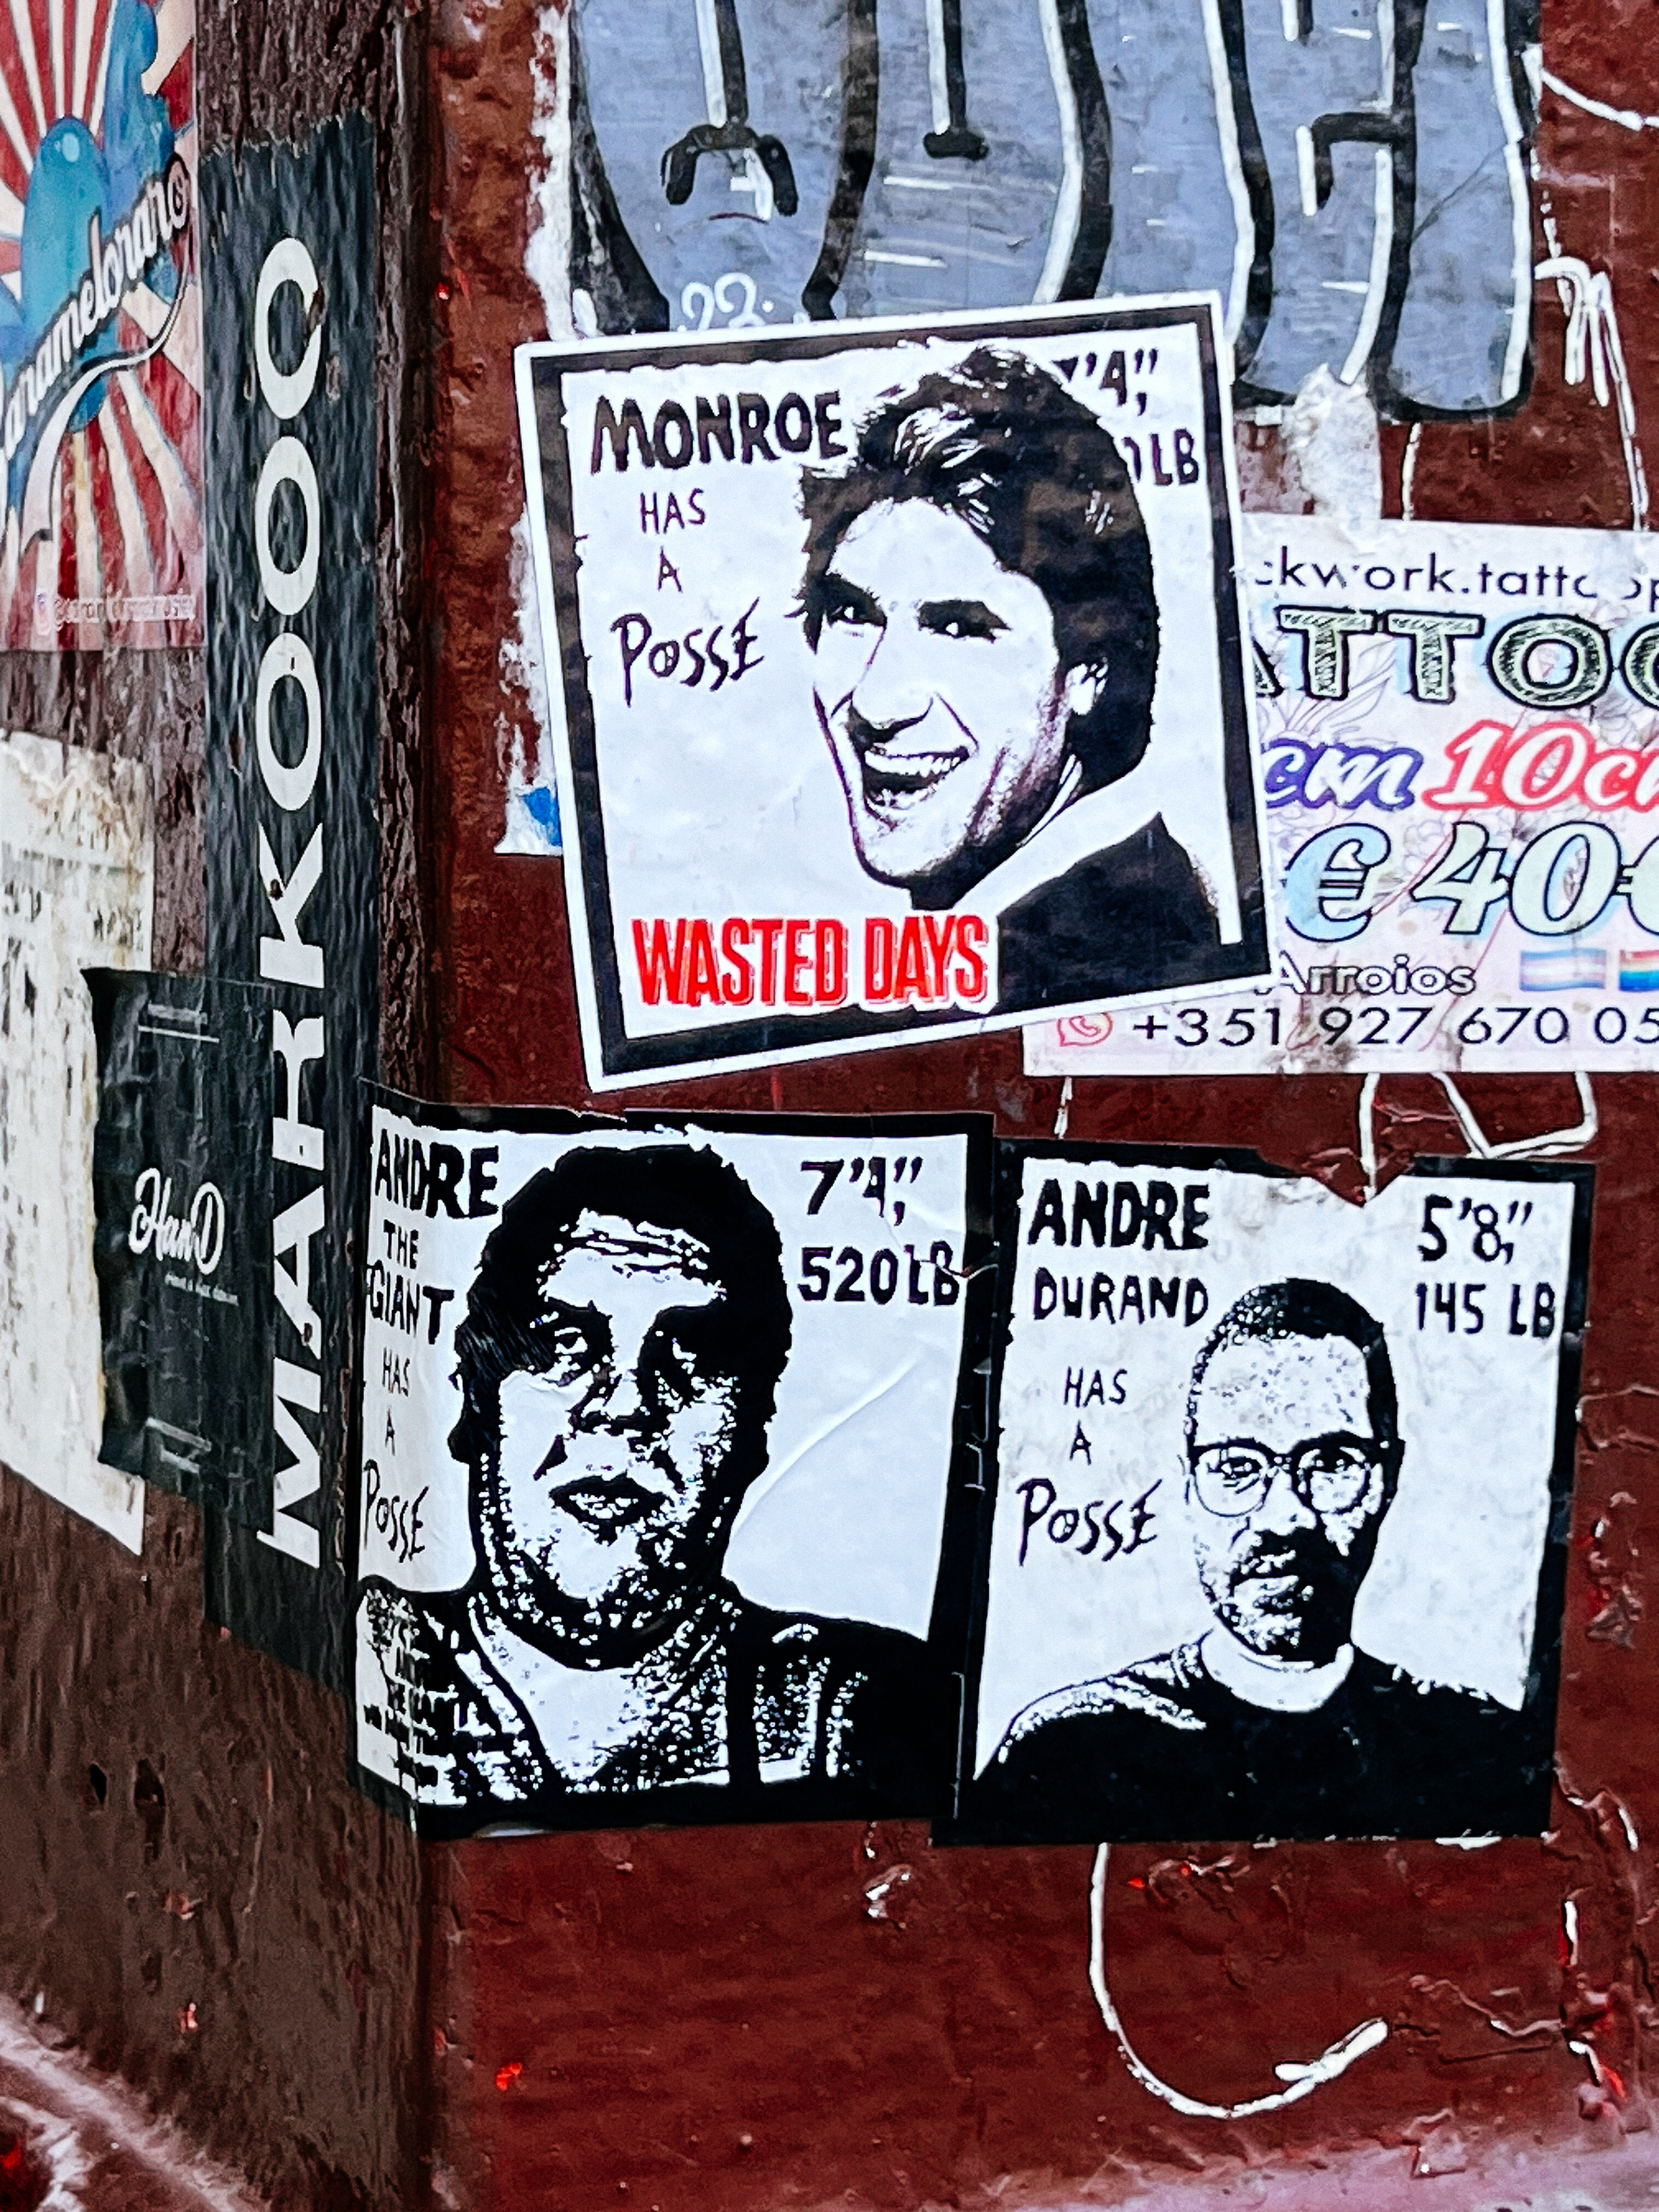 Stickers on a wall show stylized portraits with text: &ldquo;MONROE HAS A POSSE WASTED DAYS,&rdquo; &ldquo;ANDRE THE GIANT HAS A POSSE,&rdquo; and &ldquo;ANDRE DURAND HAS A POSSE.&quot;